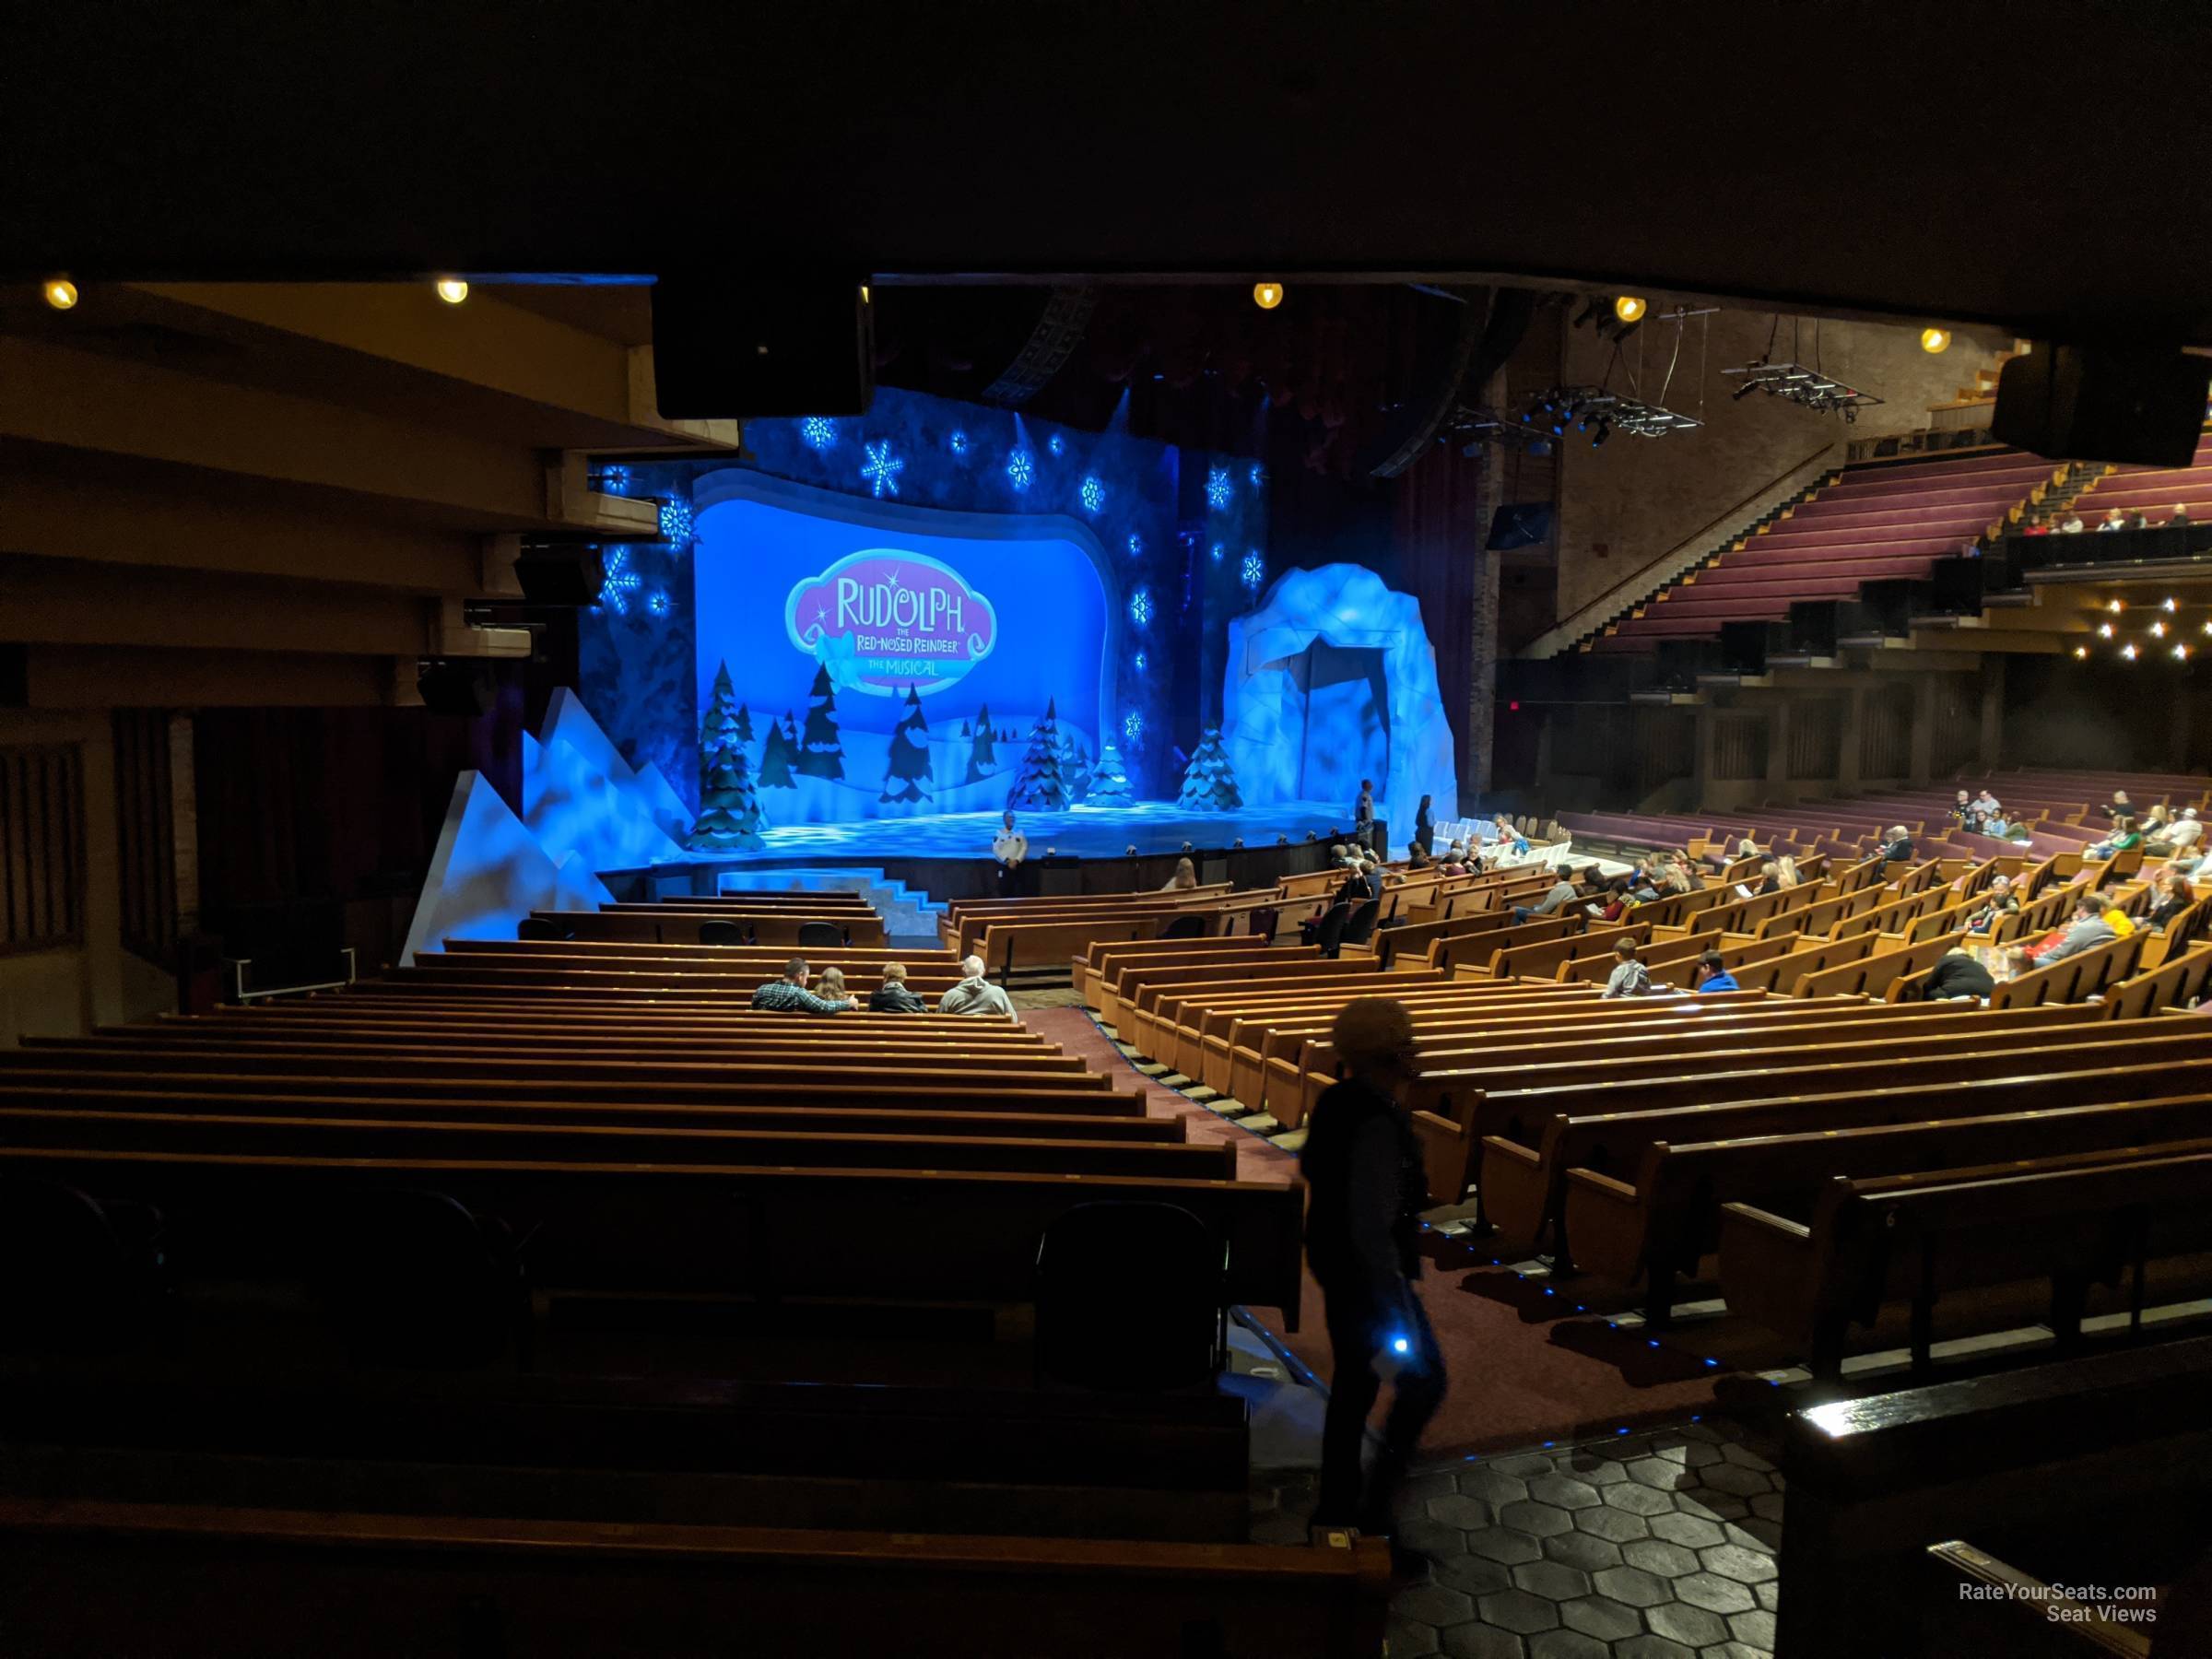 section 15, row w seat view  - grand ole opry house